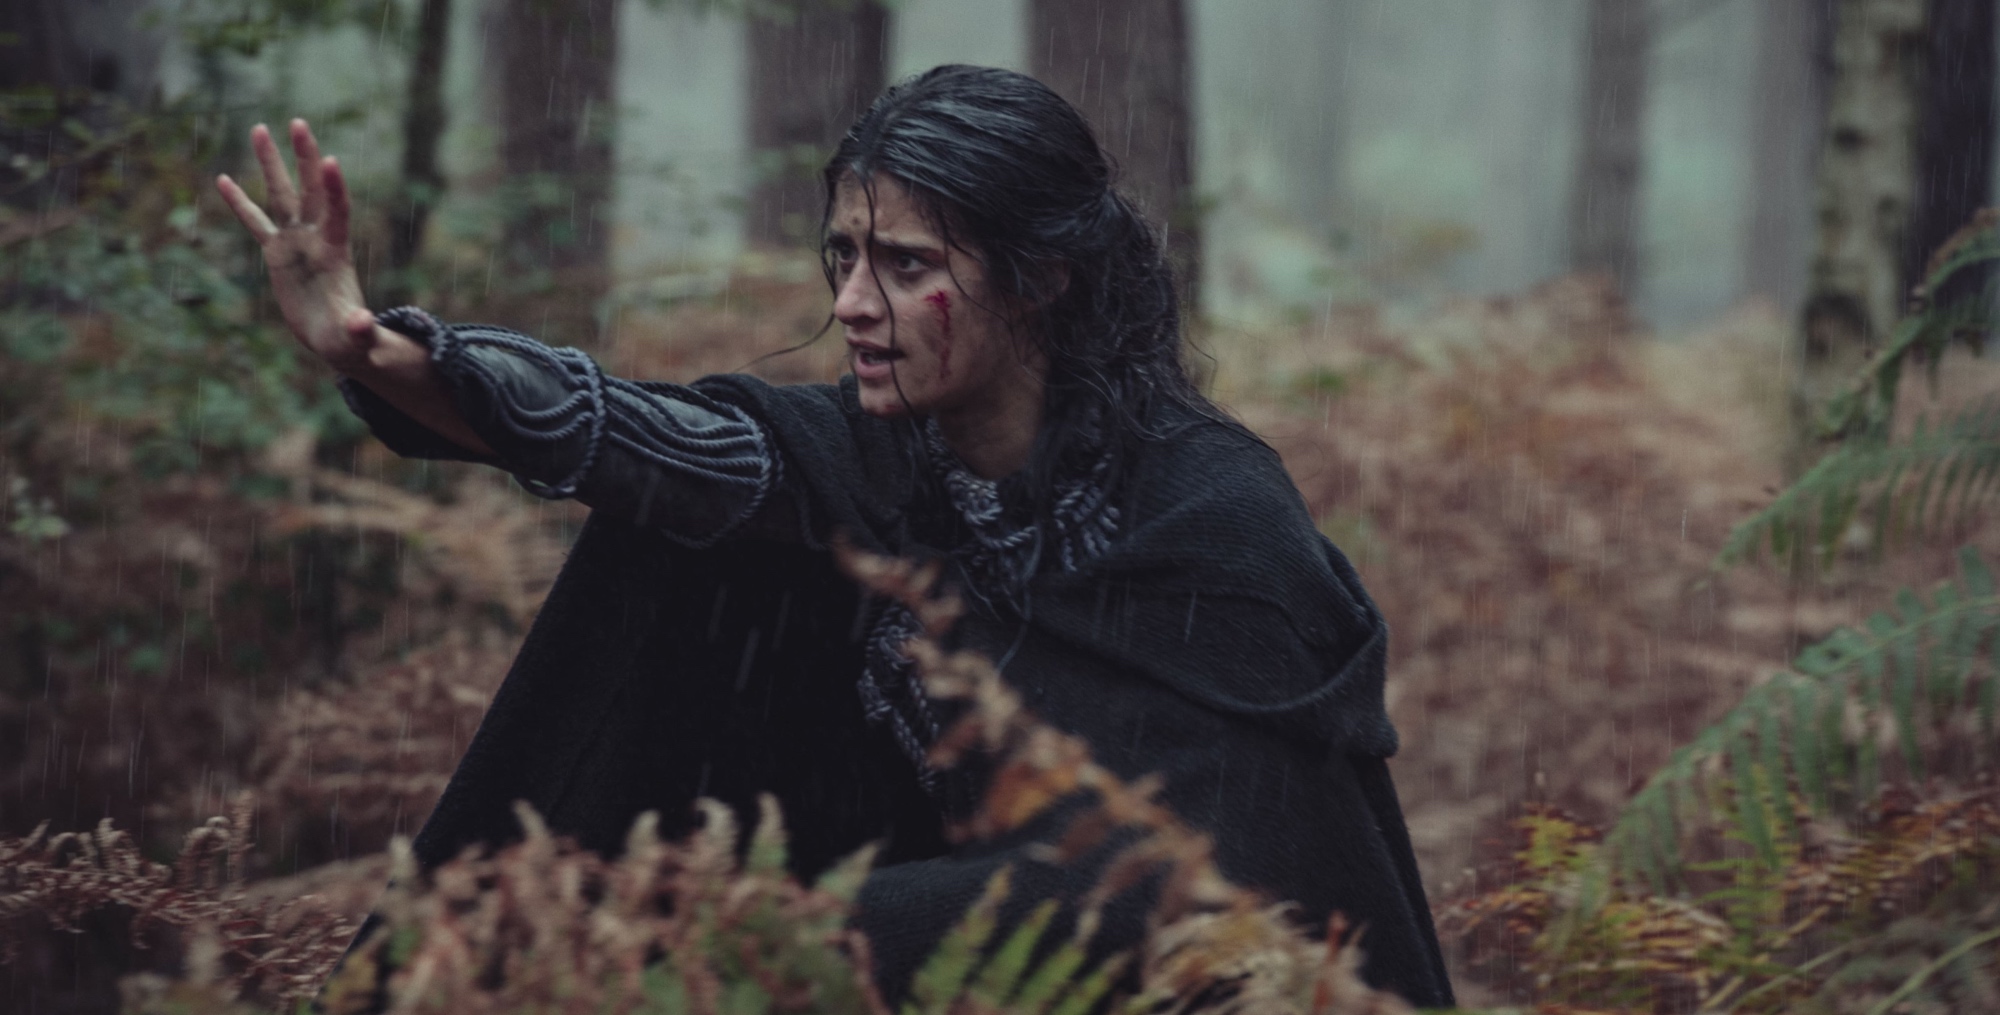 Yennefer in 'The Witcher' Season 2 in the rainy forest wearing cloak.